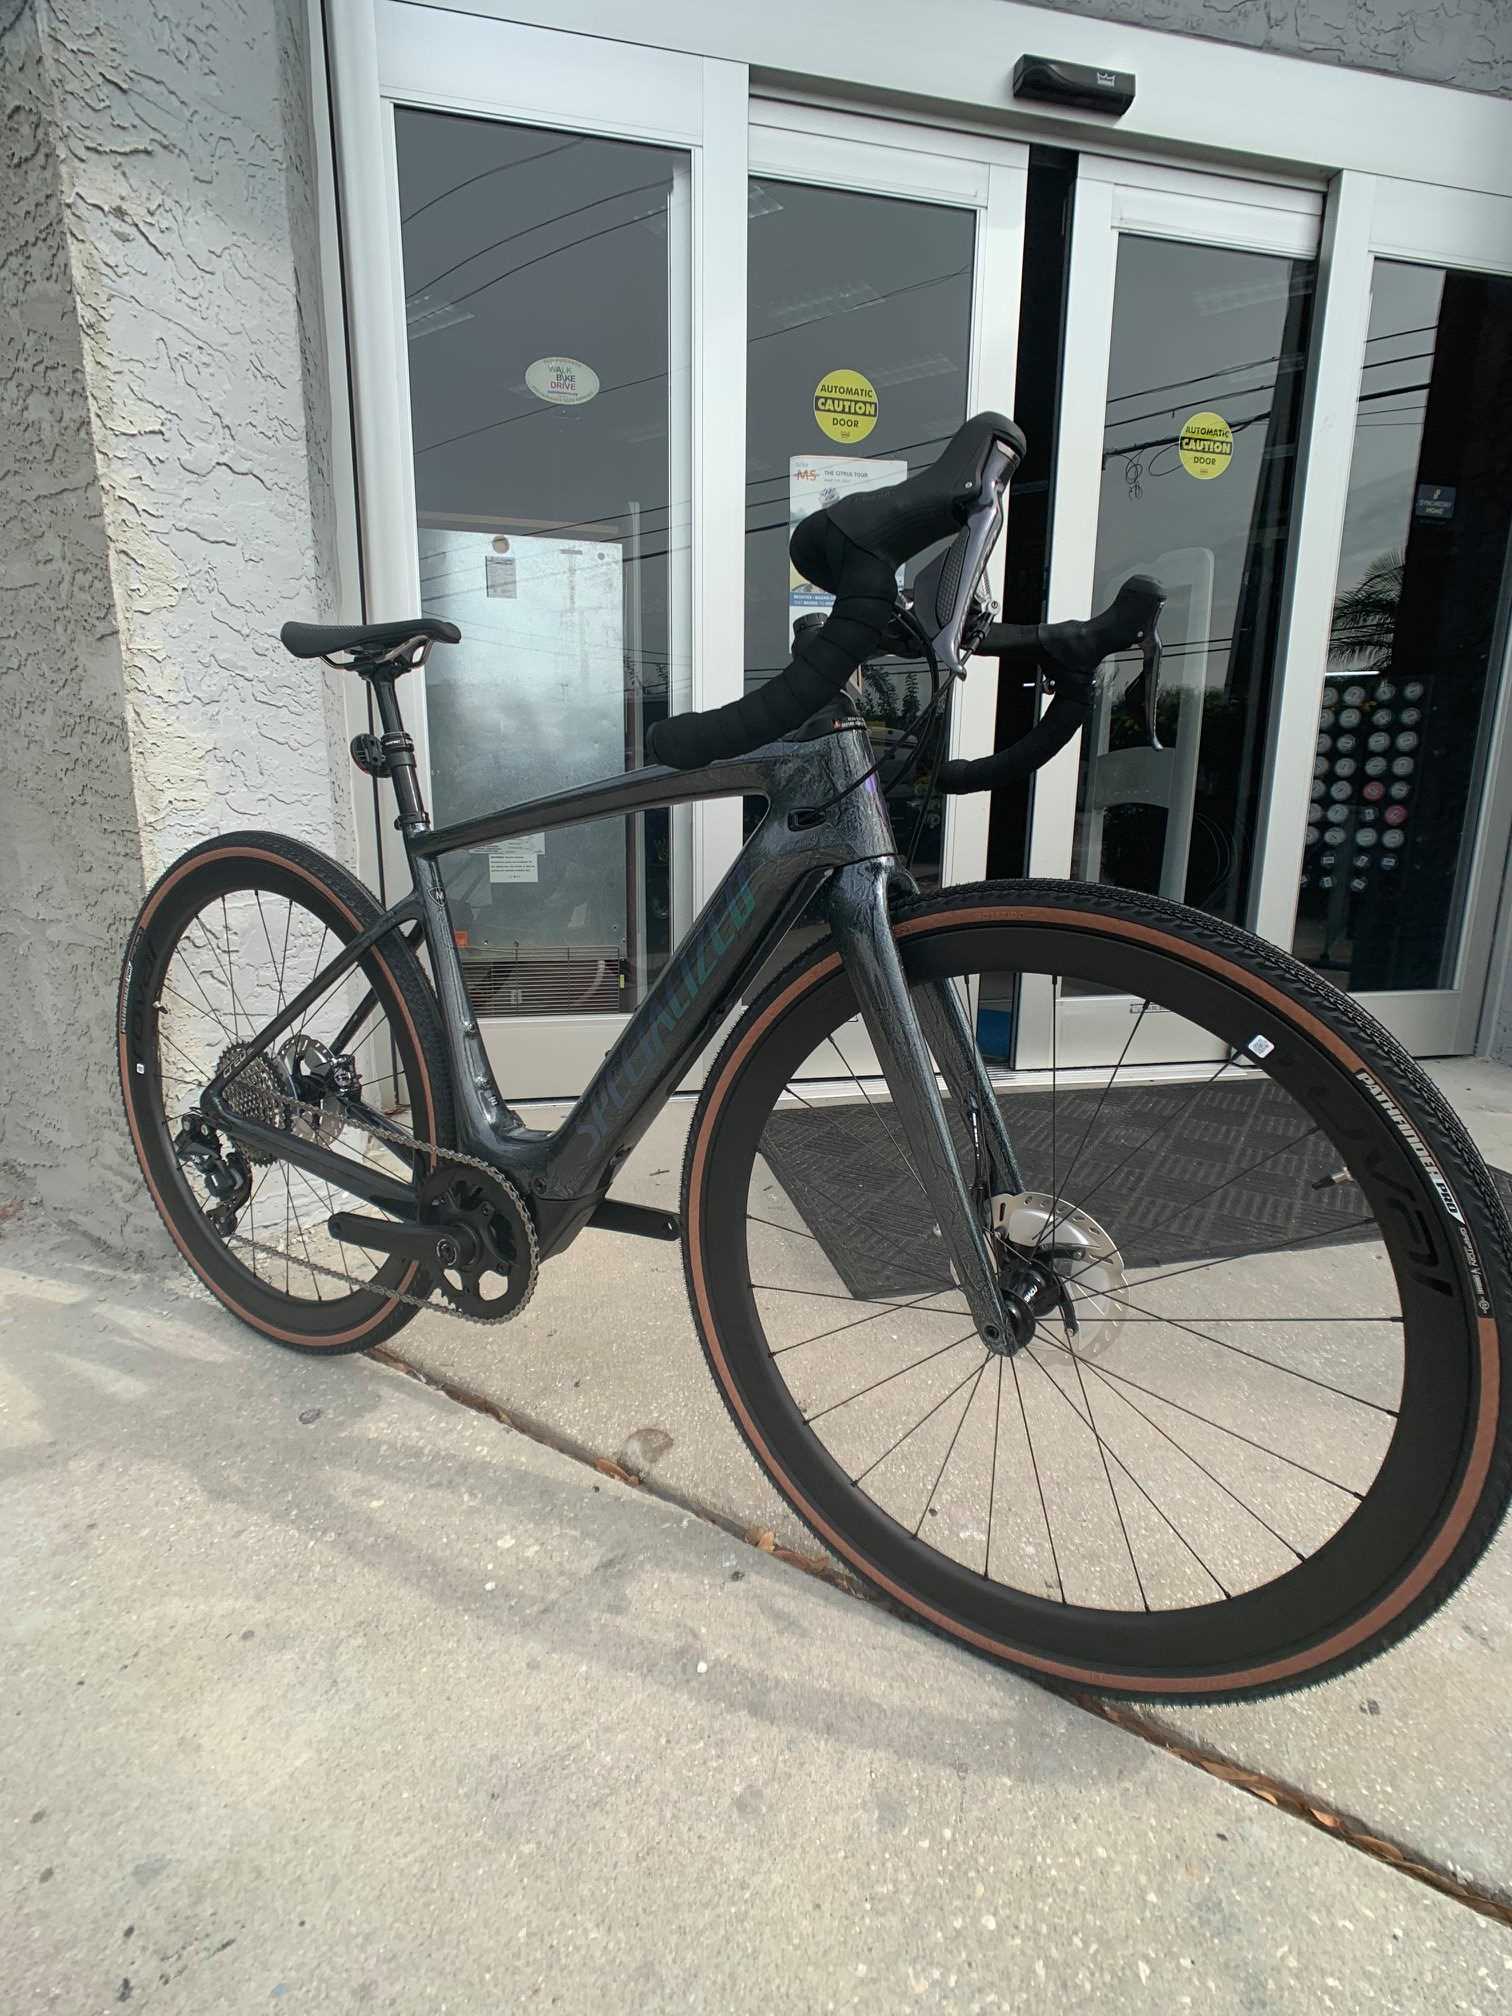 2022 Specialized S-Works Turbo Creo SL EVO  Online WhatsApp Number : +49 1521 5397360